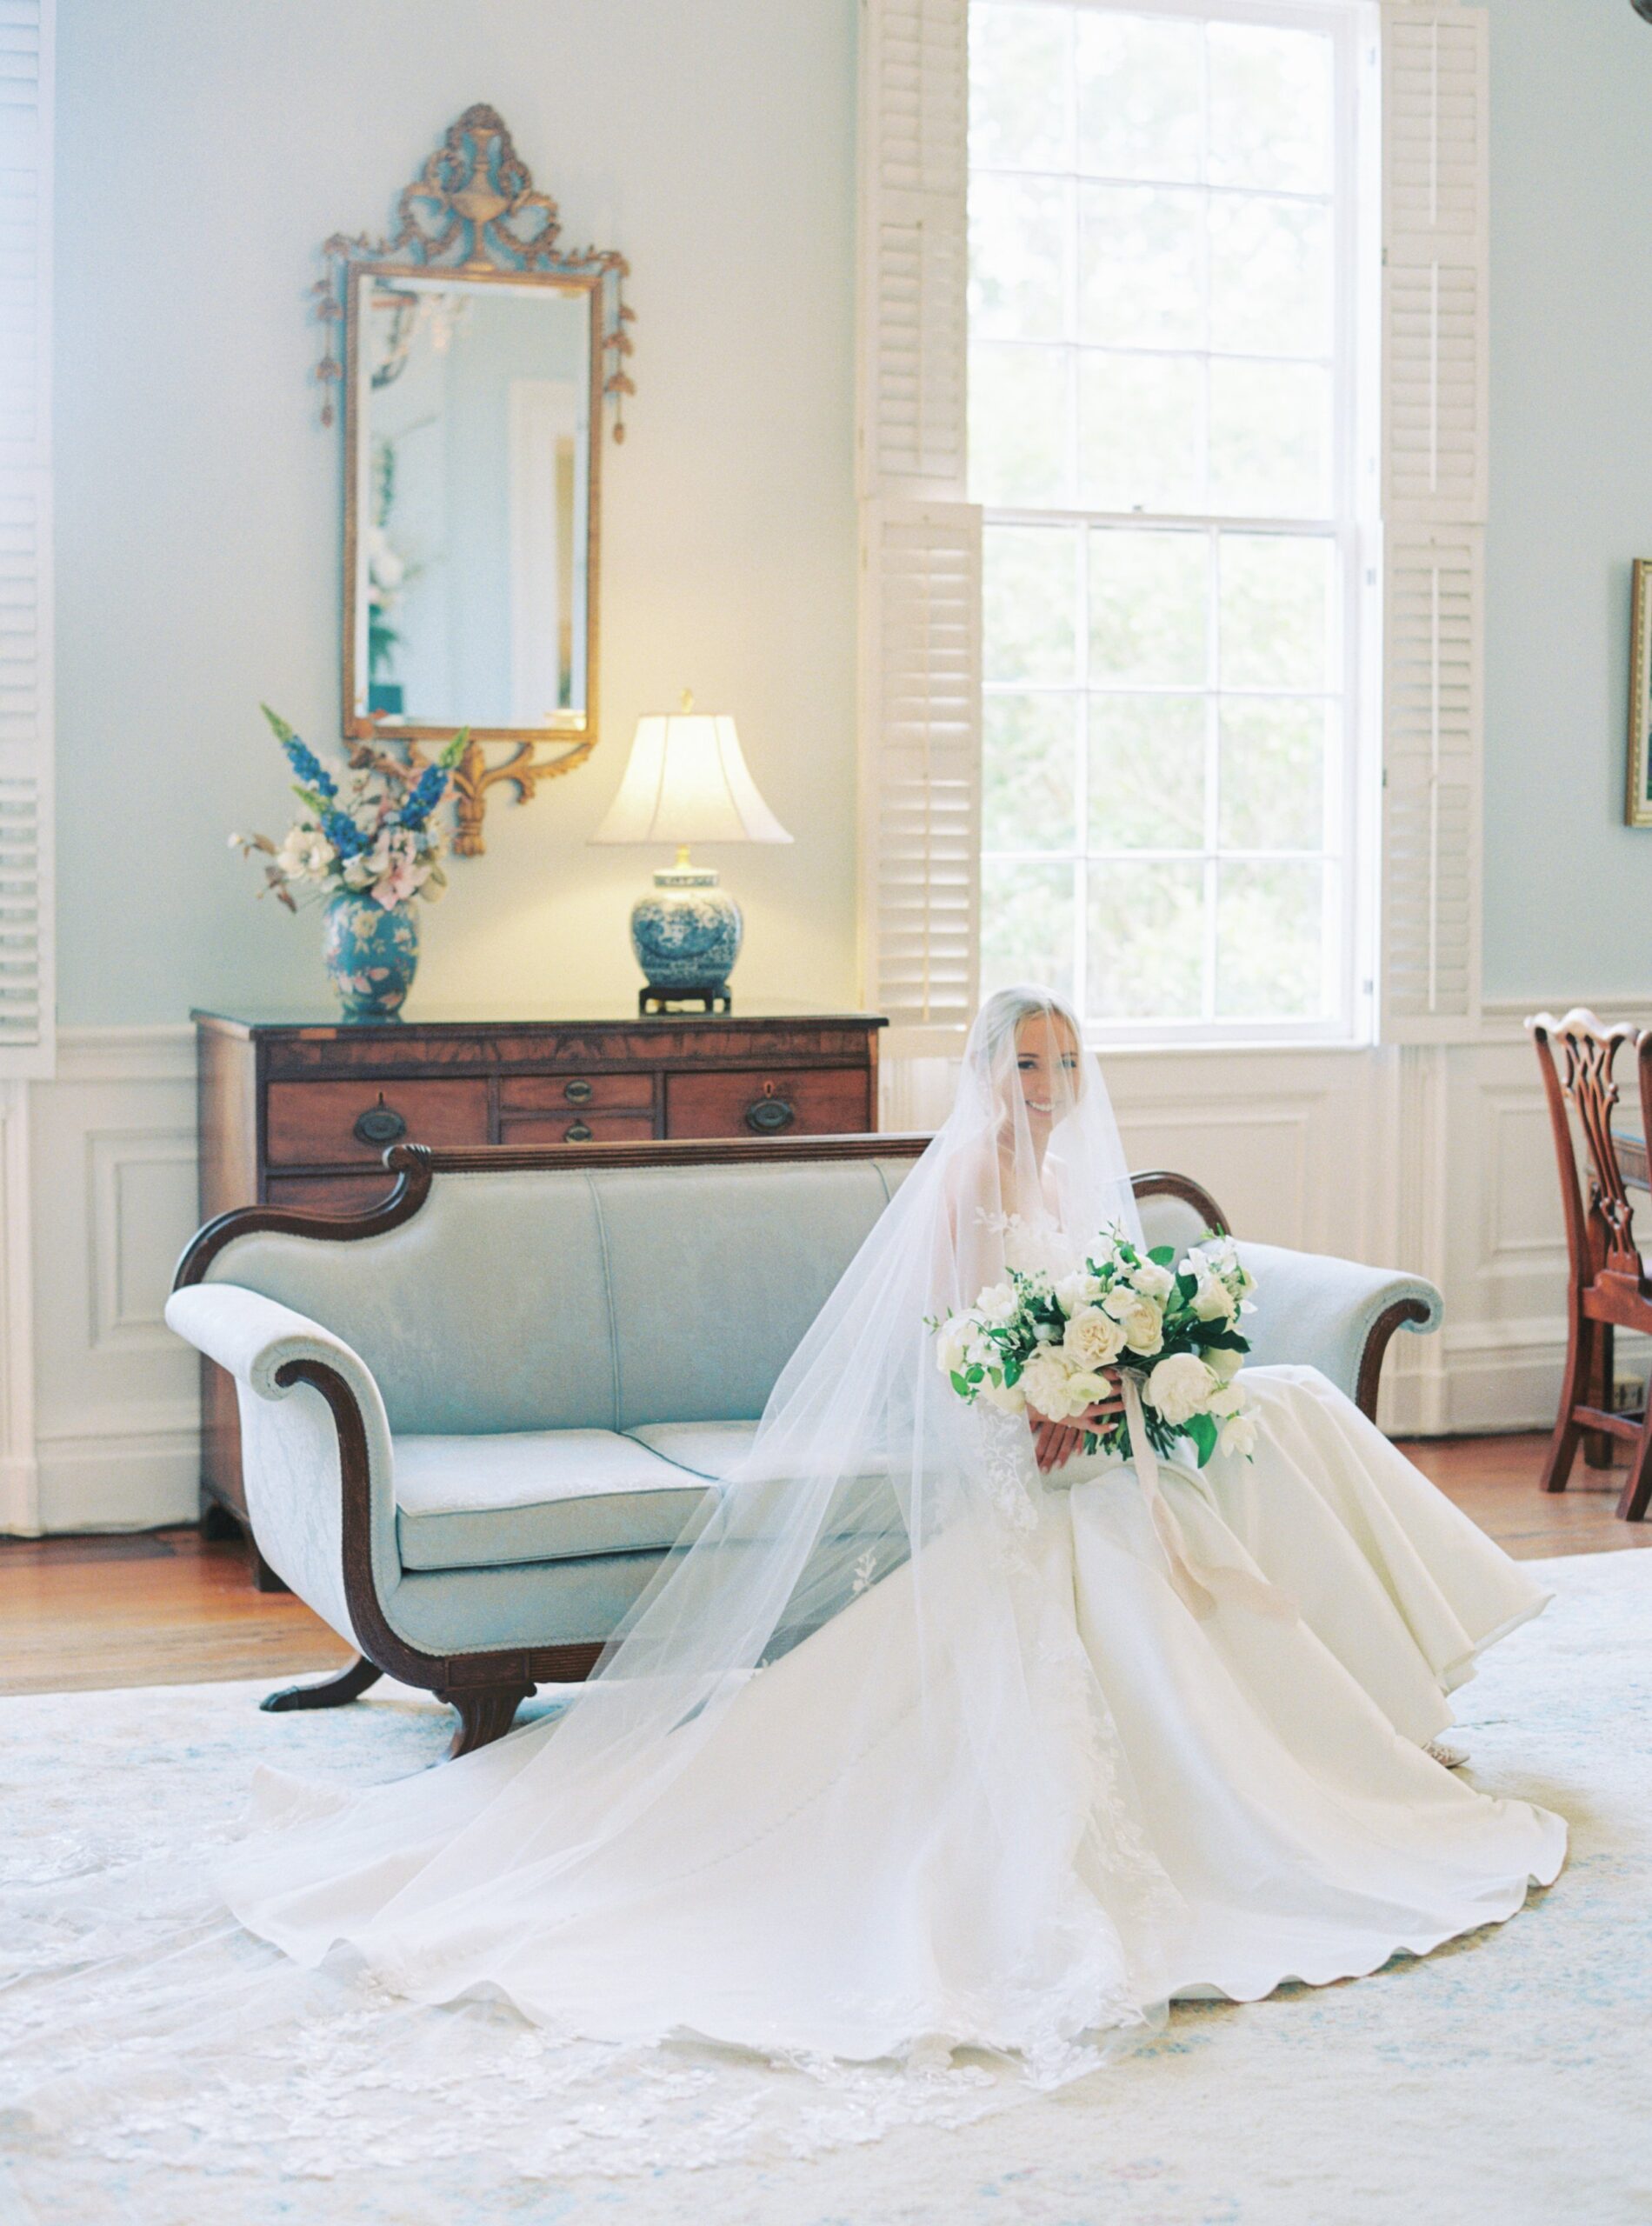 Light blue vintage couch in light blue room with bride covered in flower detailed veil. Thomas Bennett House wedding.